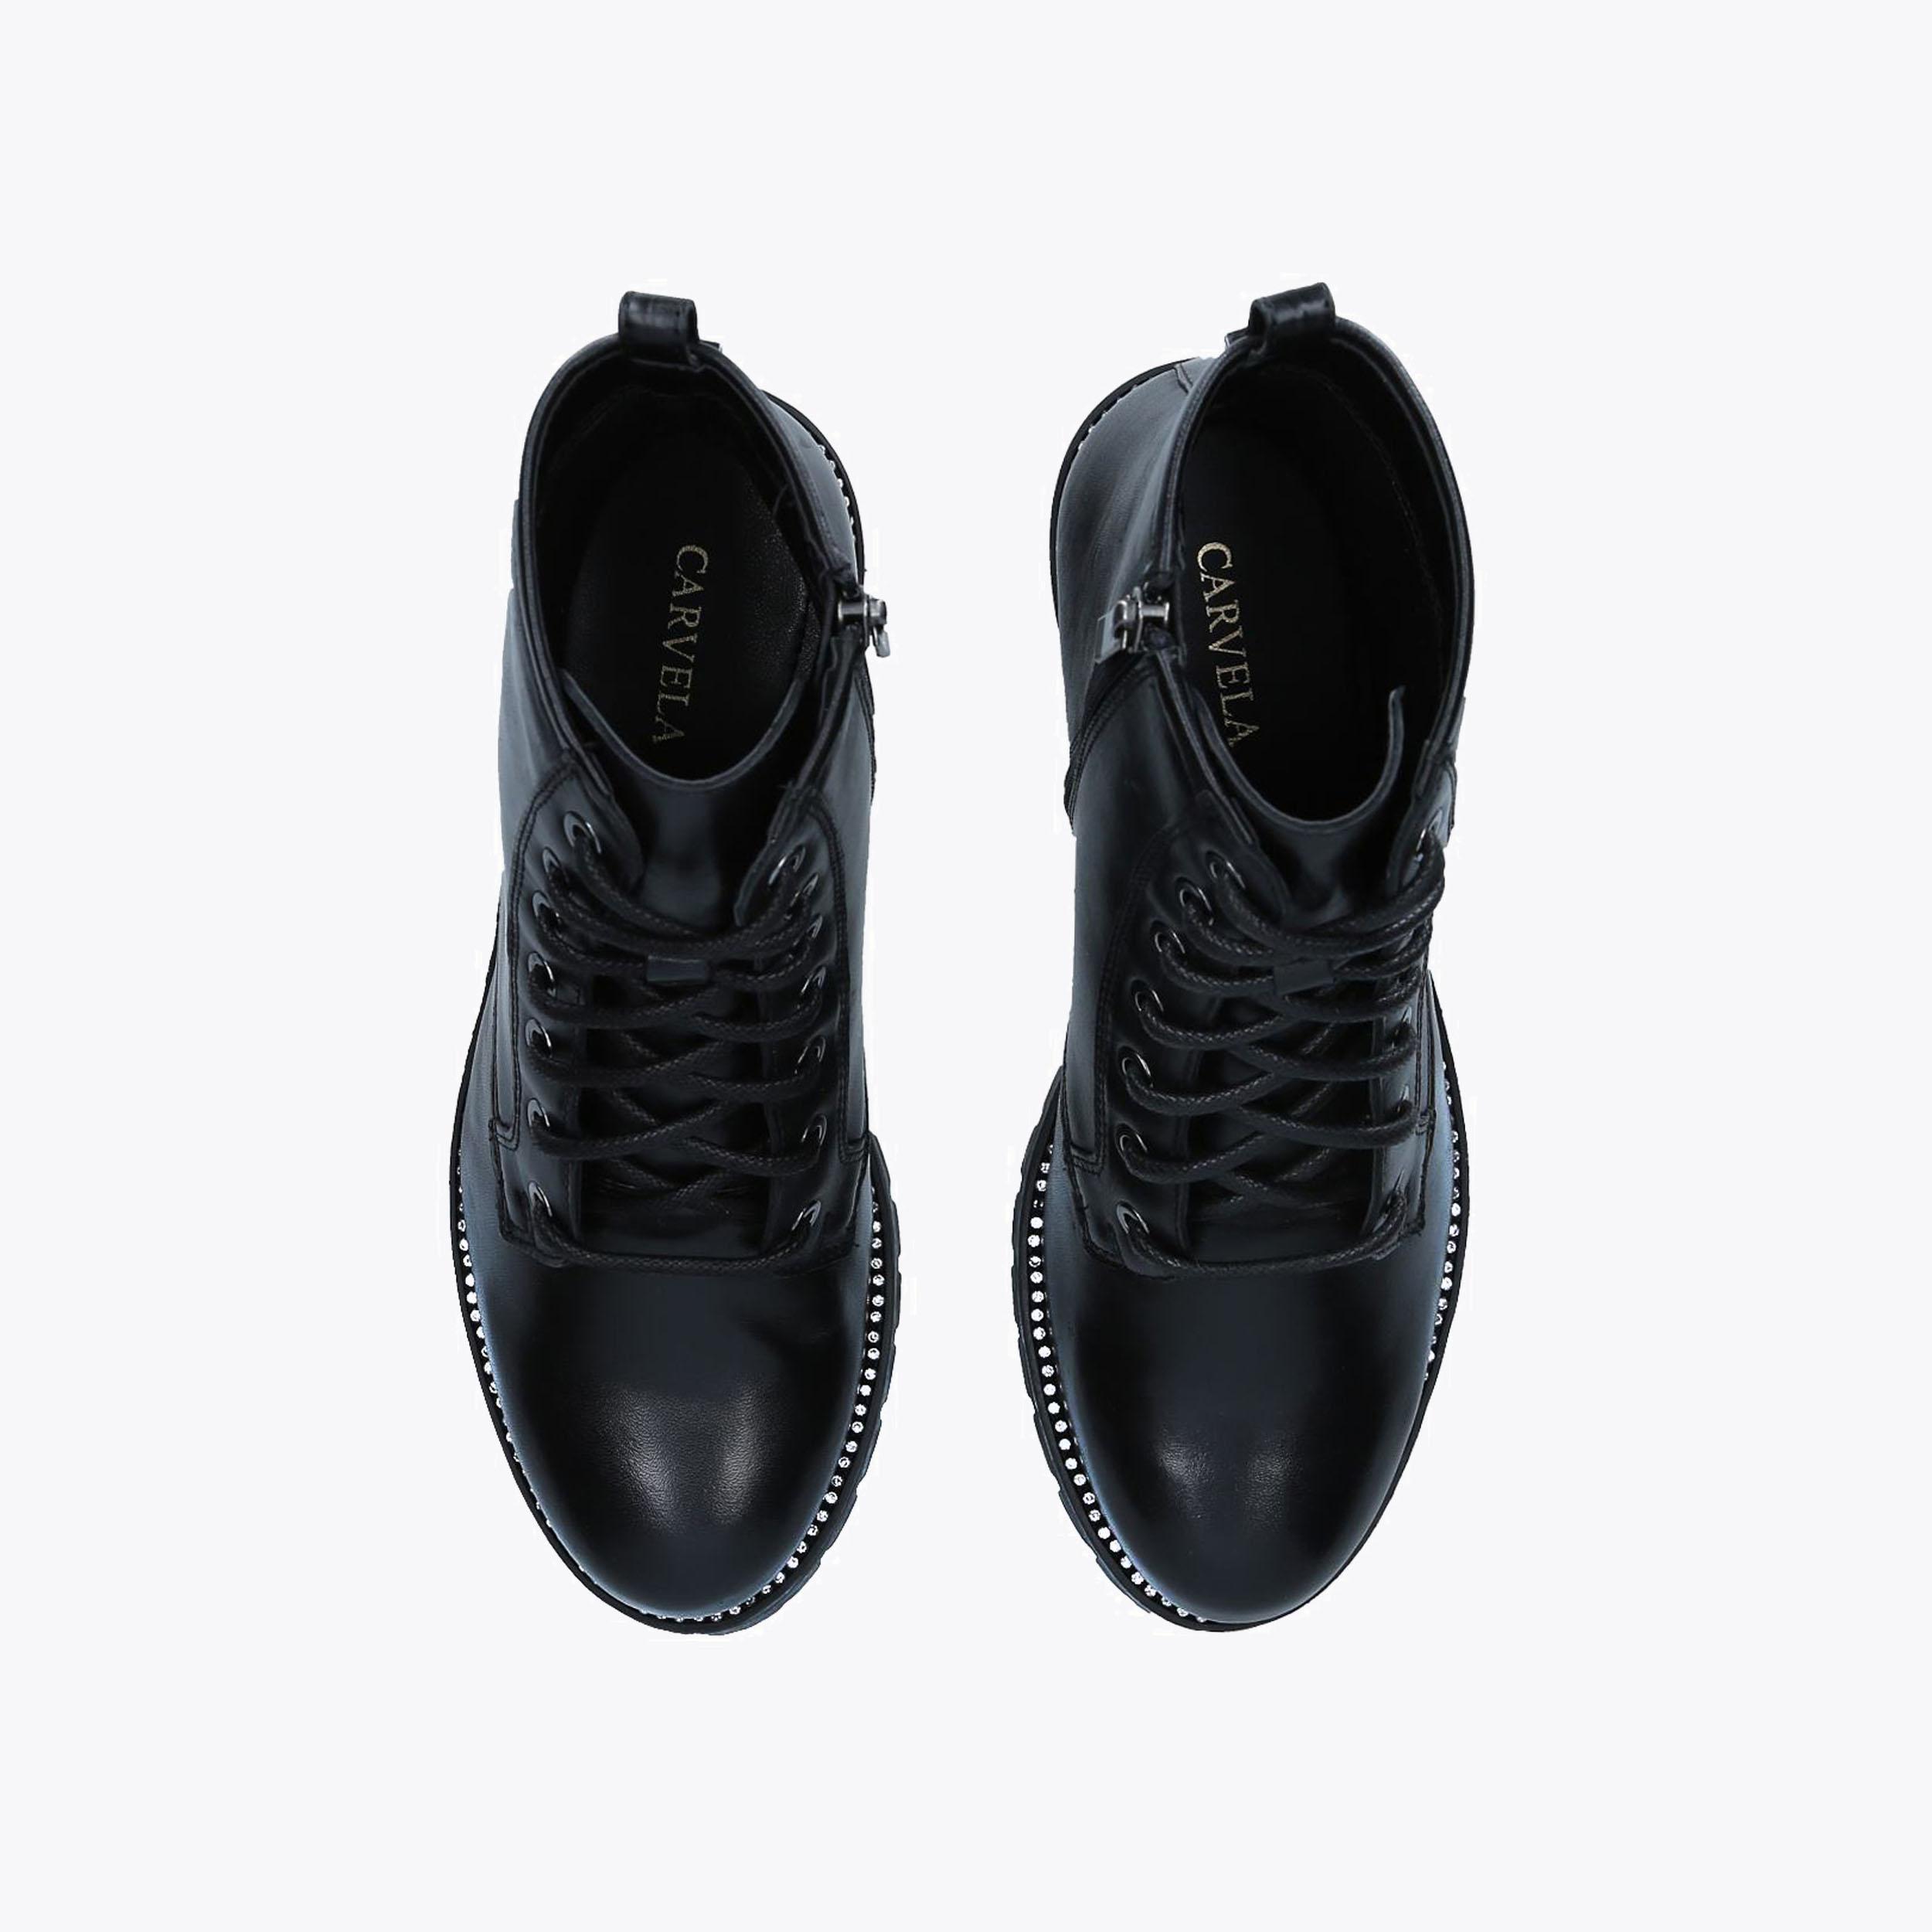 TREATY LACE UP Black Leather Lace Up Boots by CARVELA